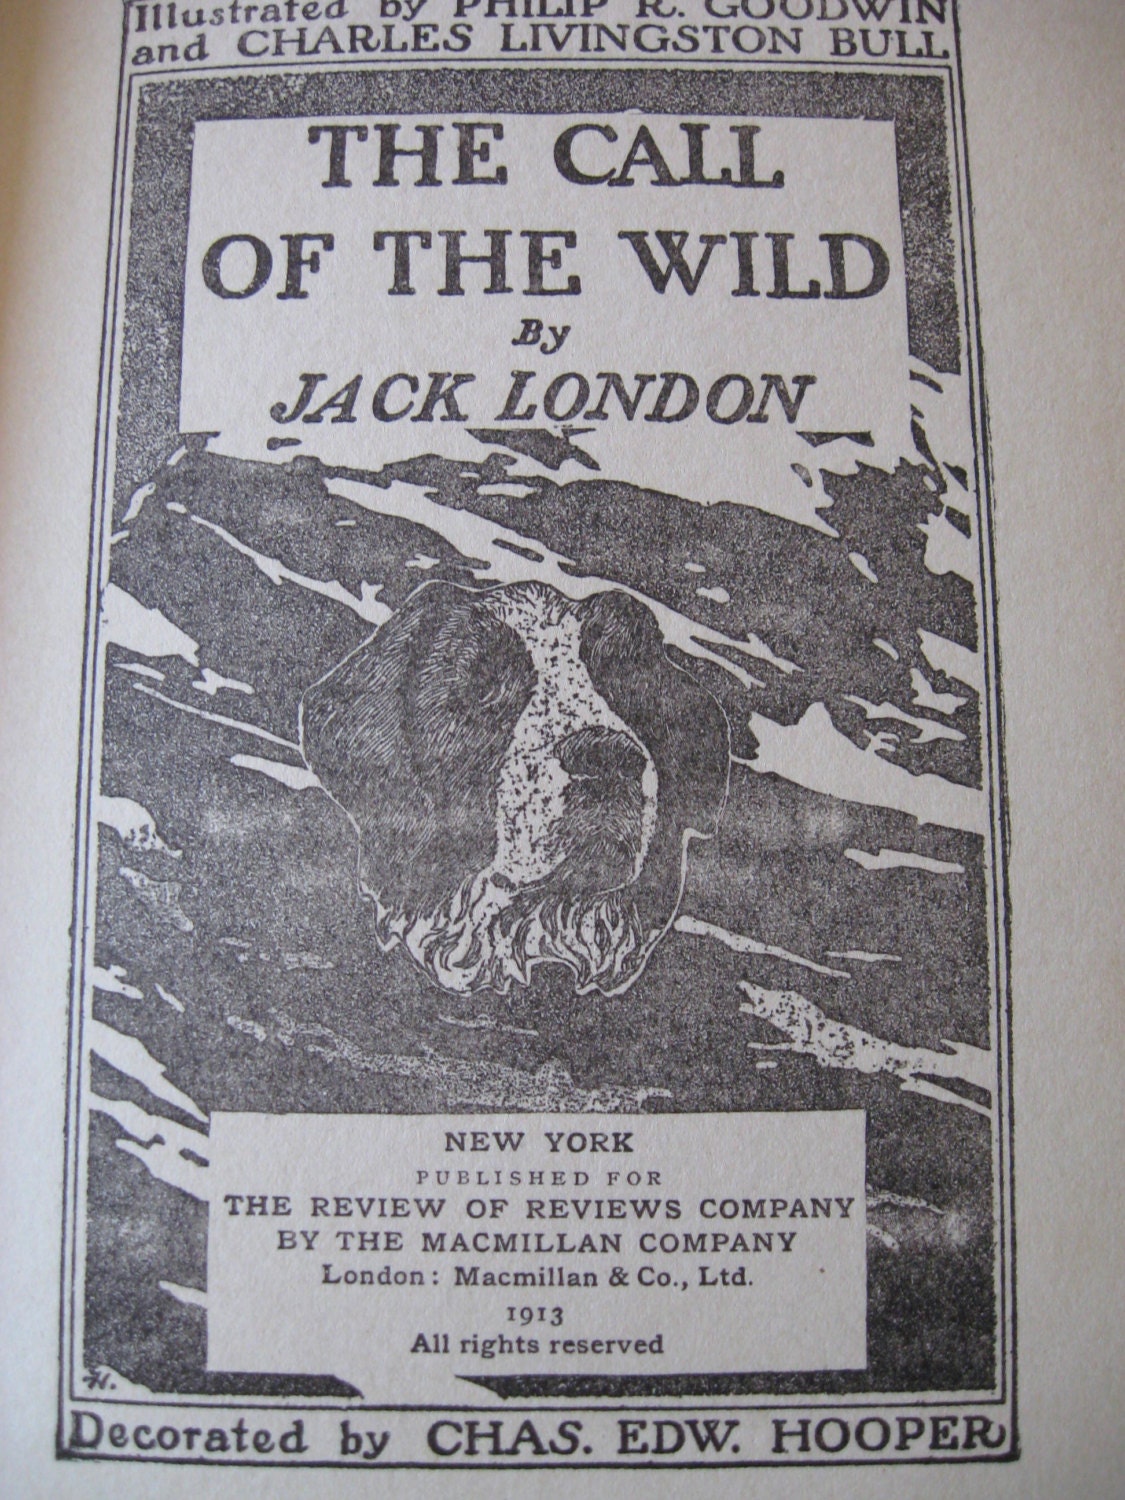 The Call of the Wild and More Tales by Jack London